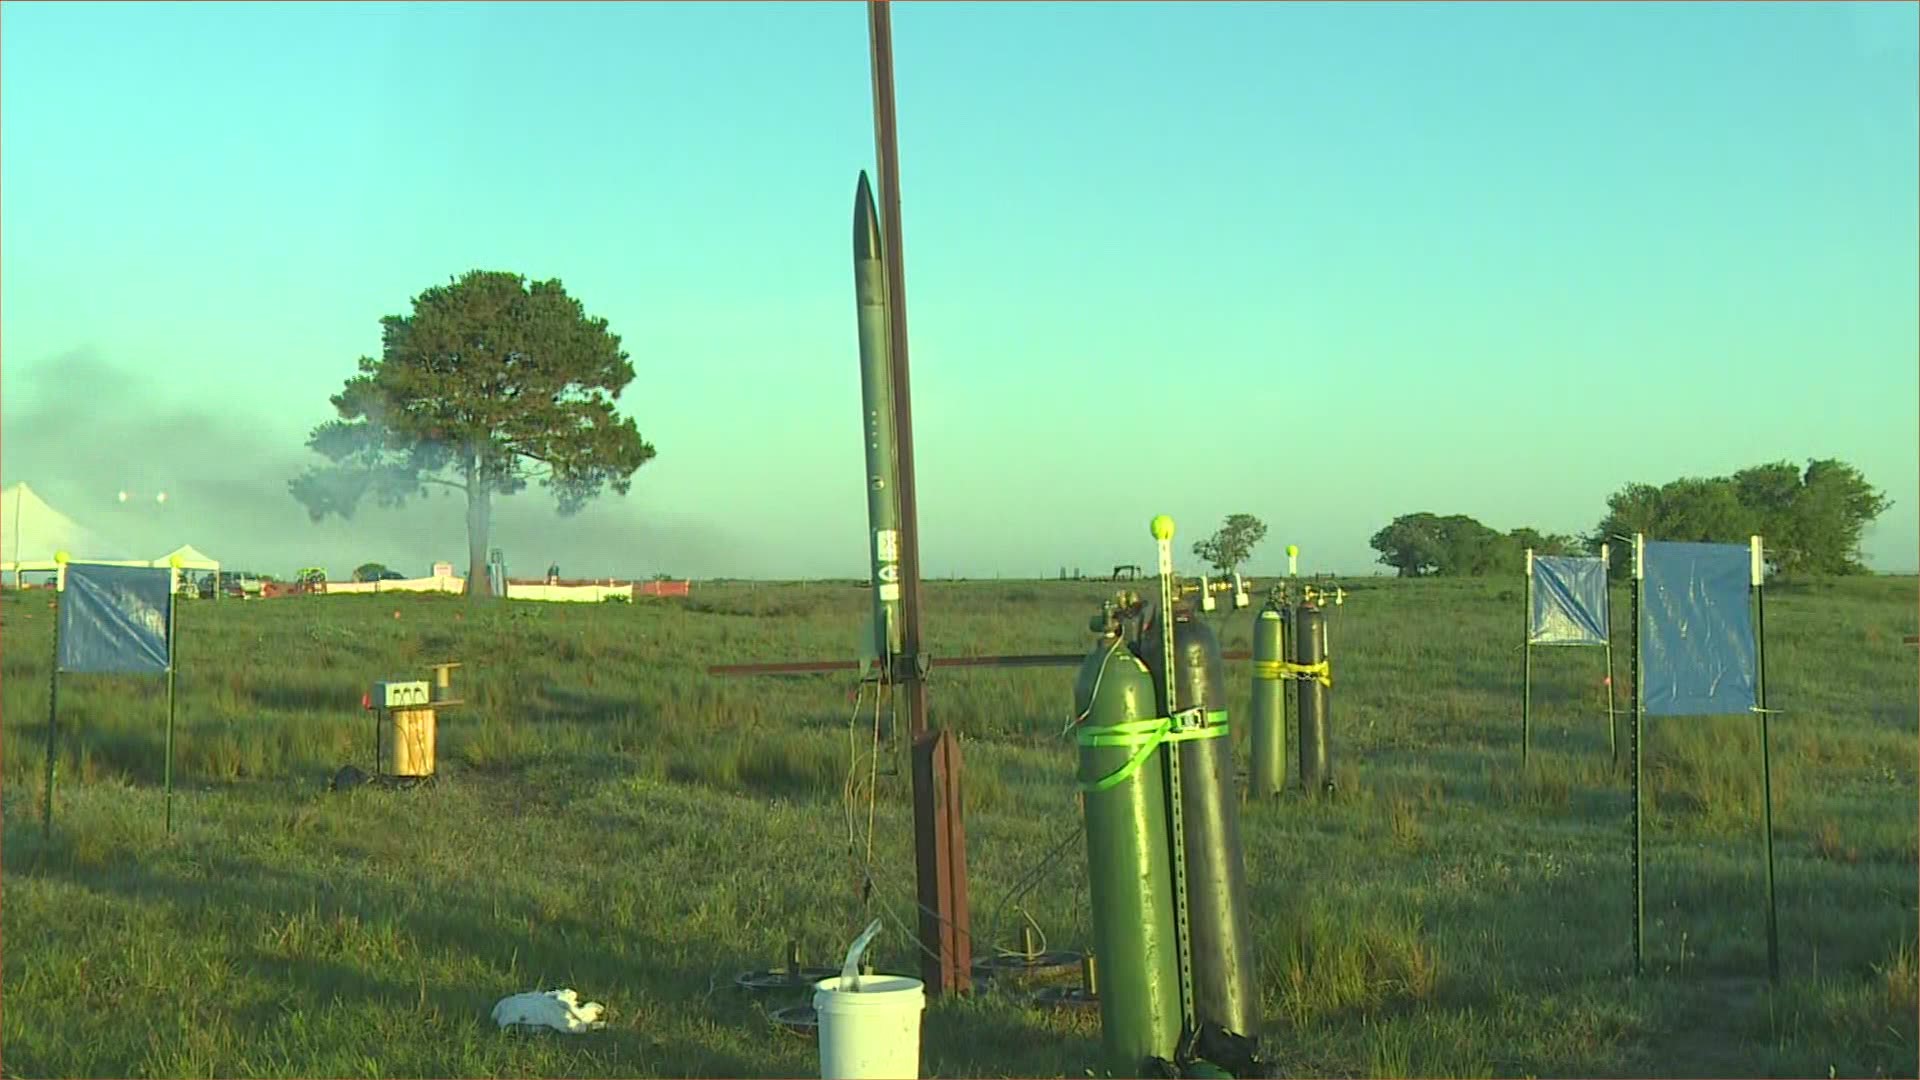 The talented students in Anahauc launch rockets with one-pound payloads about a mile into the air.